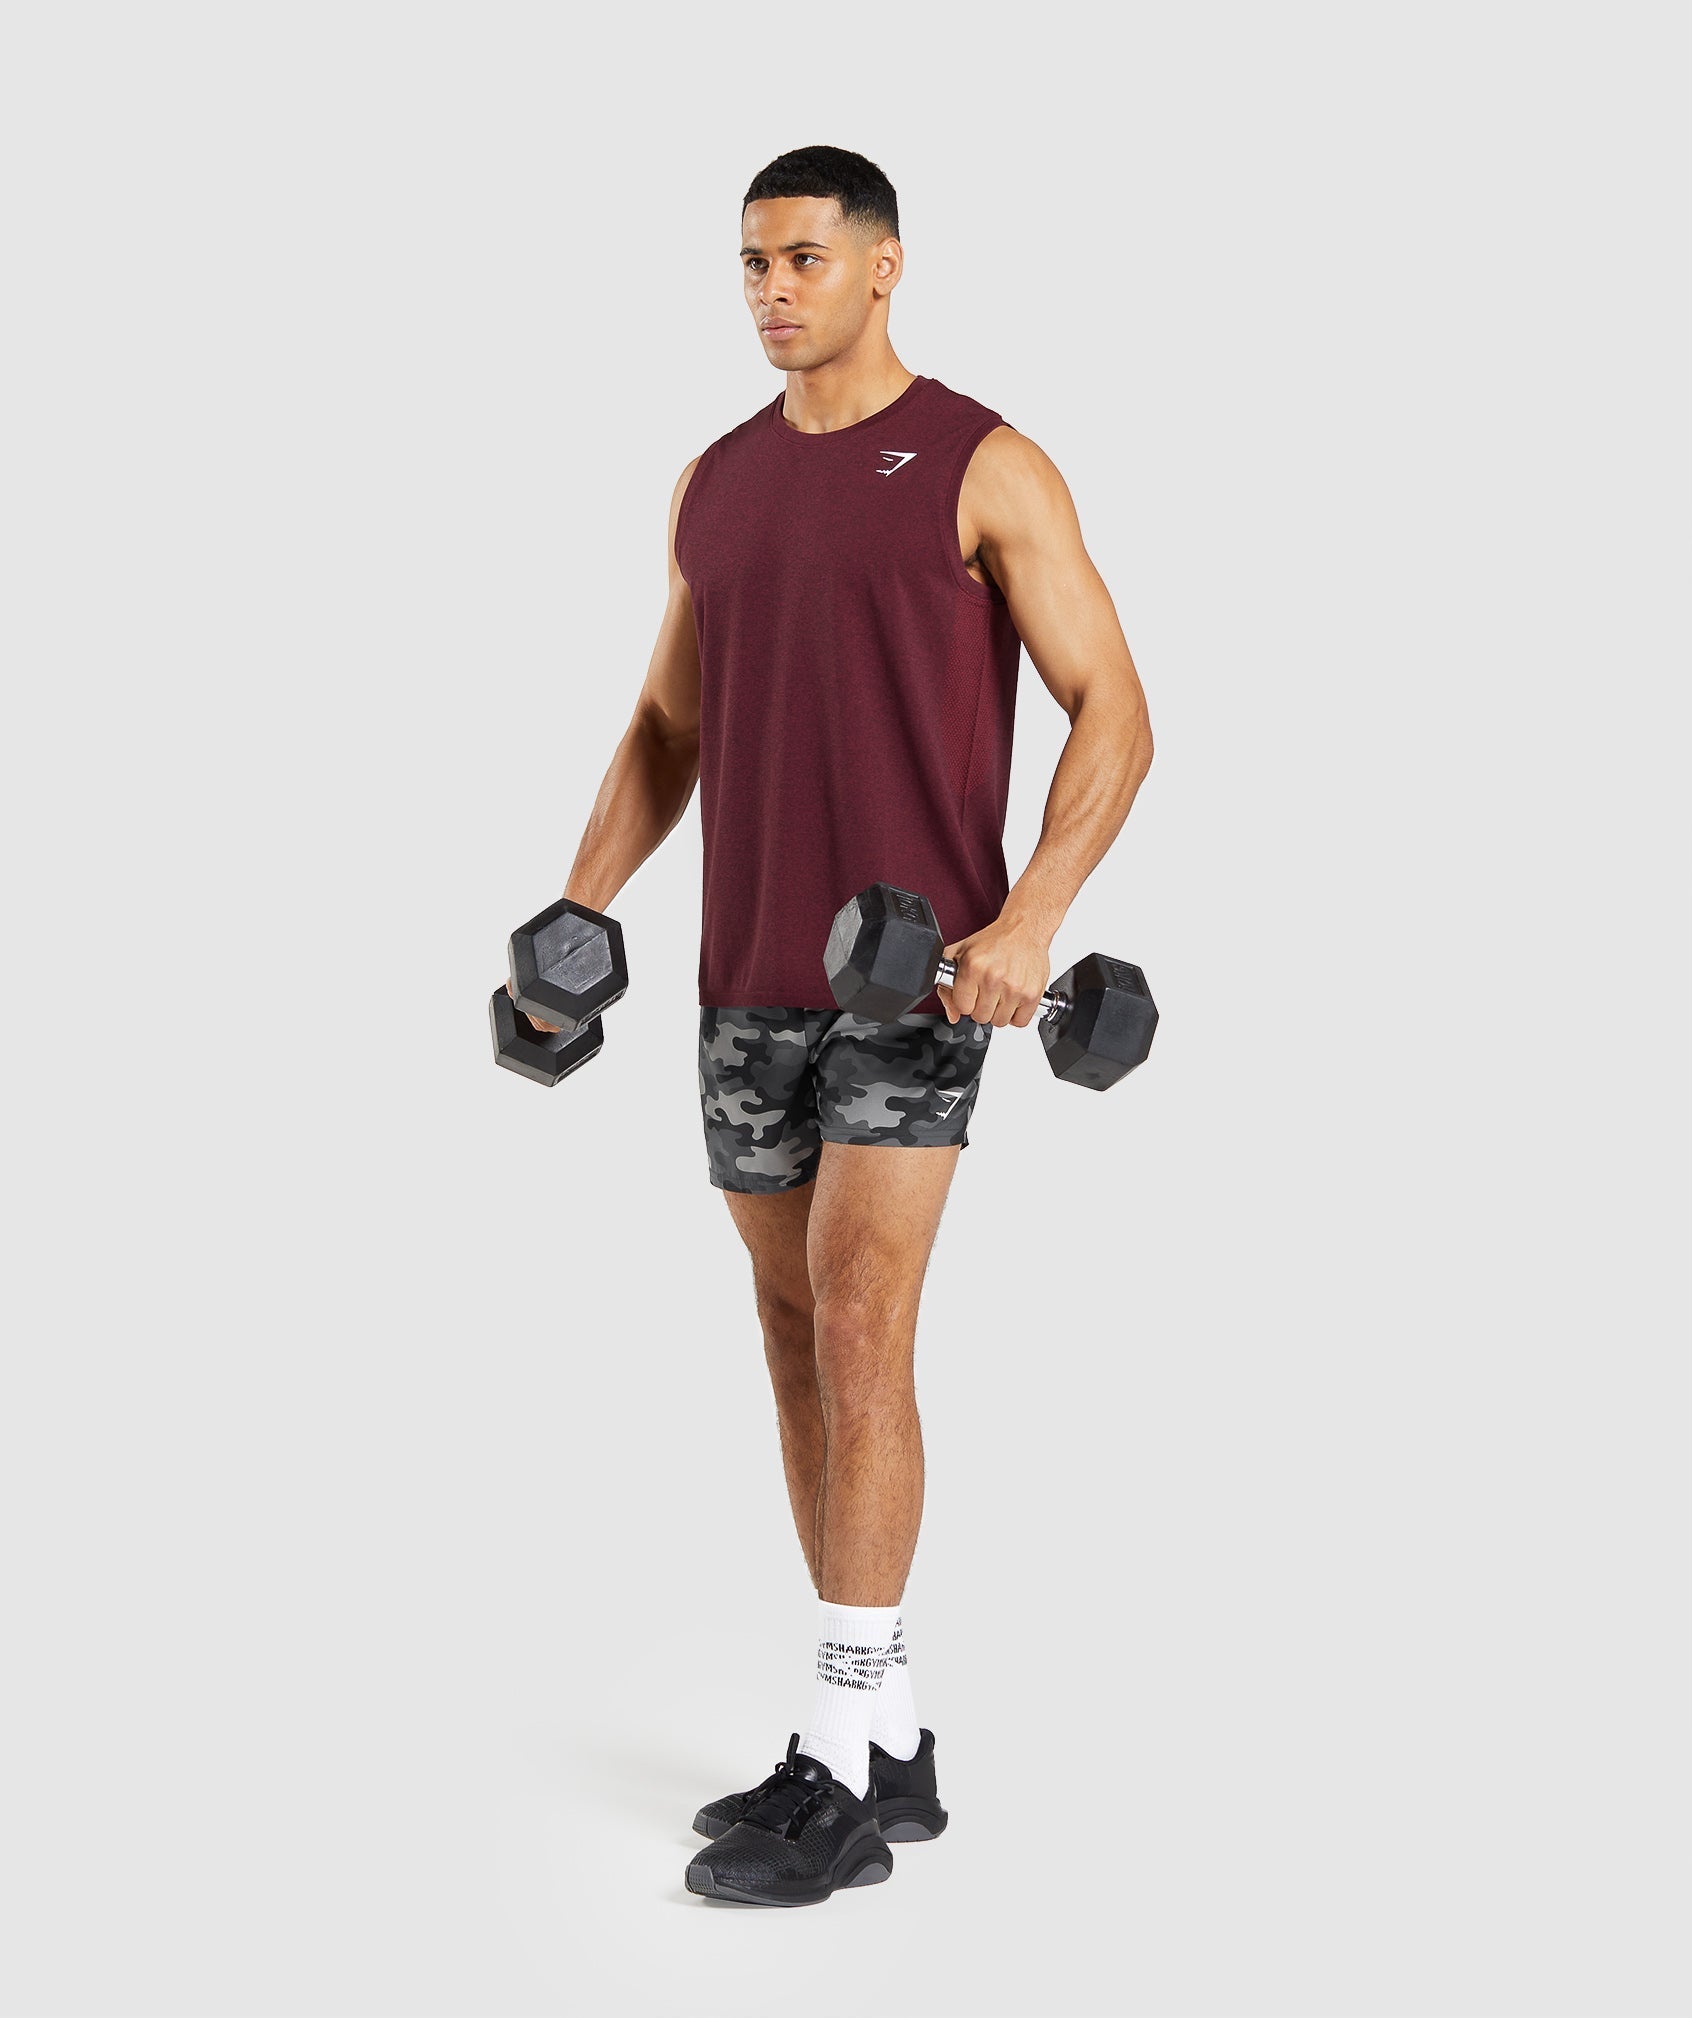 Arrival Seamless Tank in Burgundy Red Marl - view 5